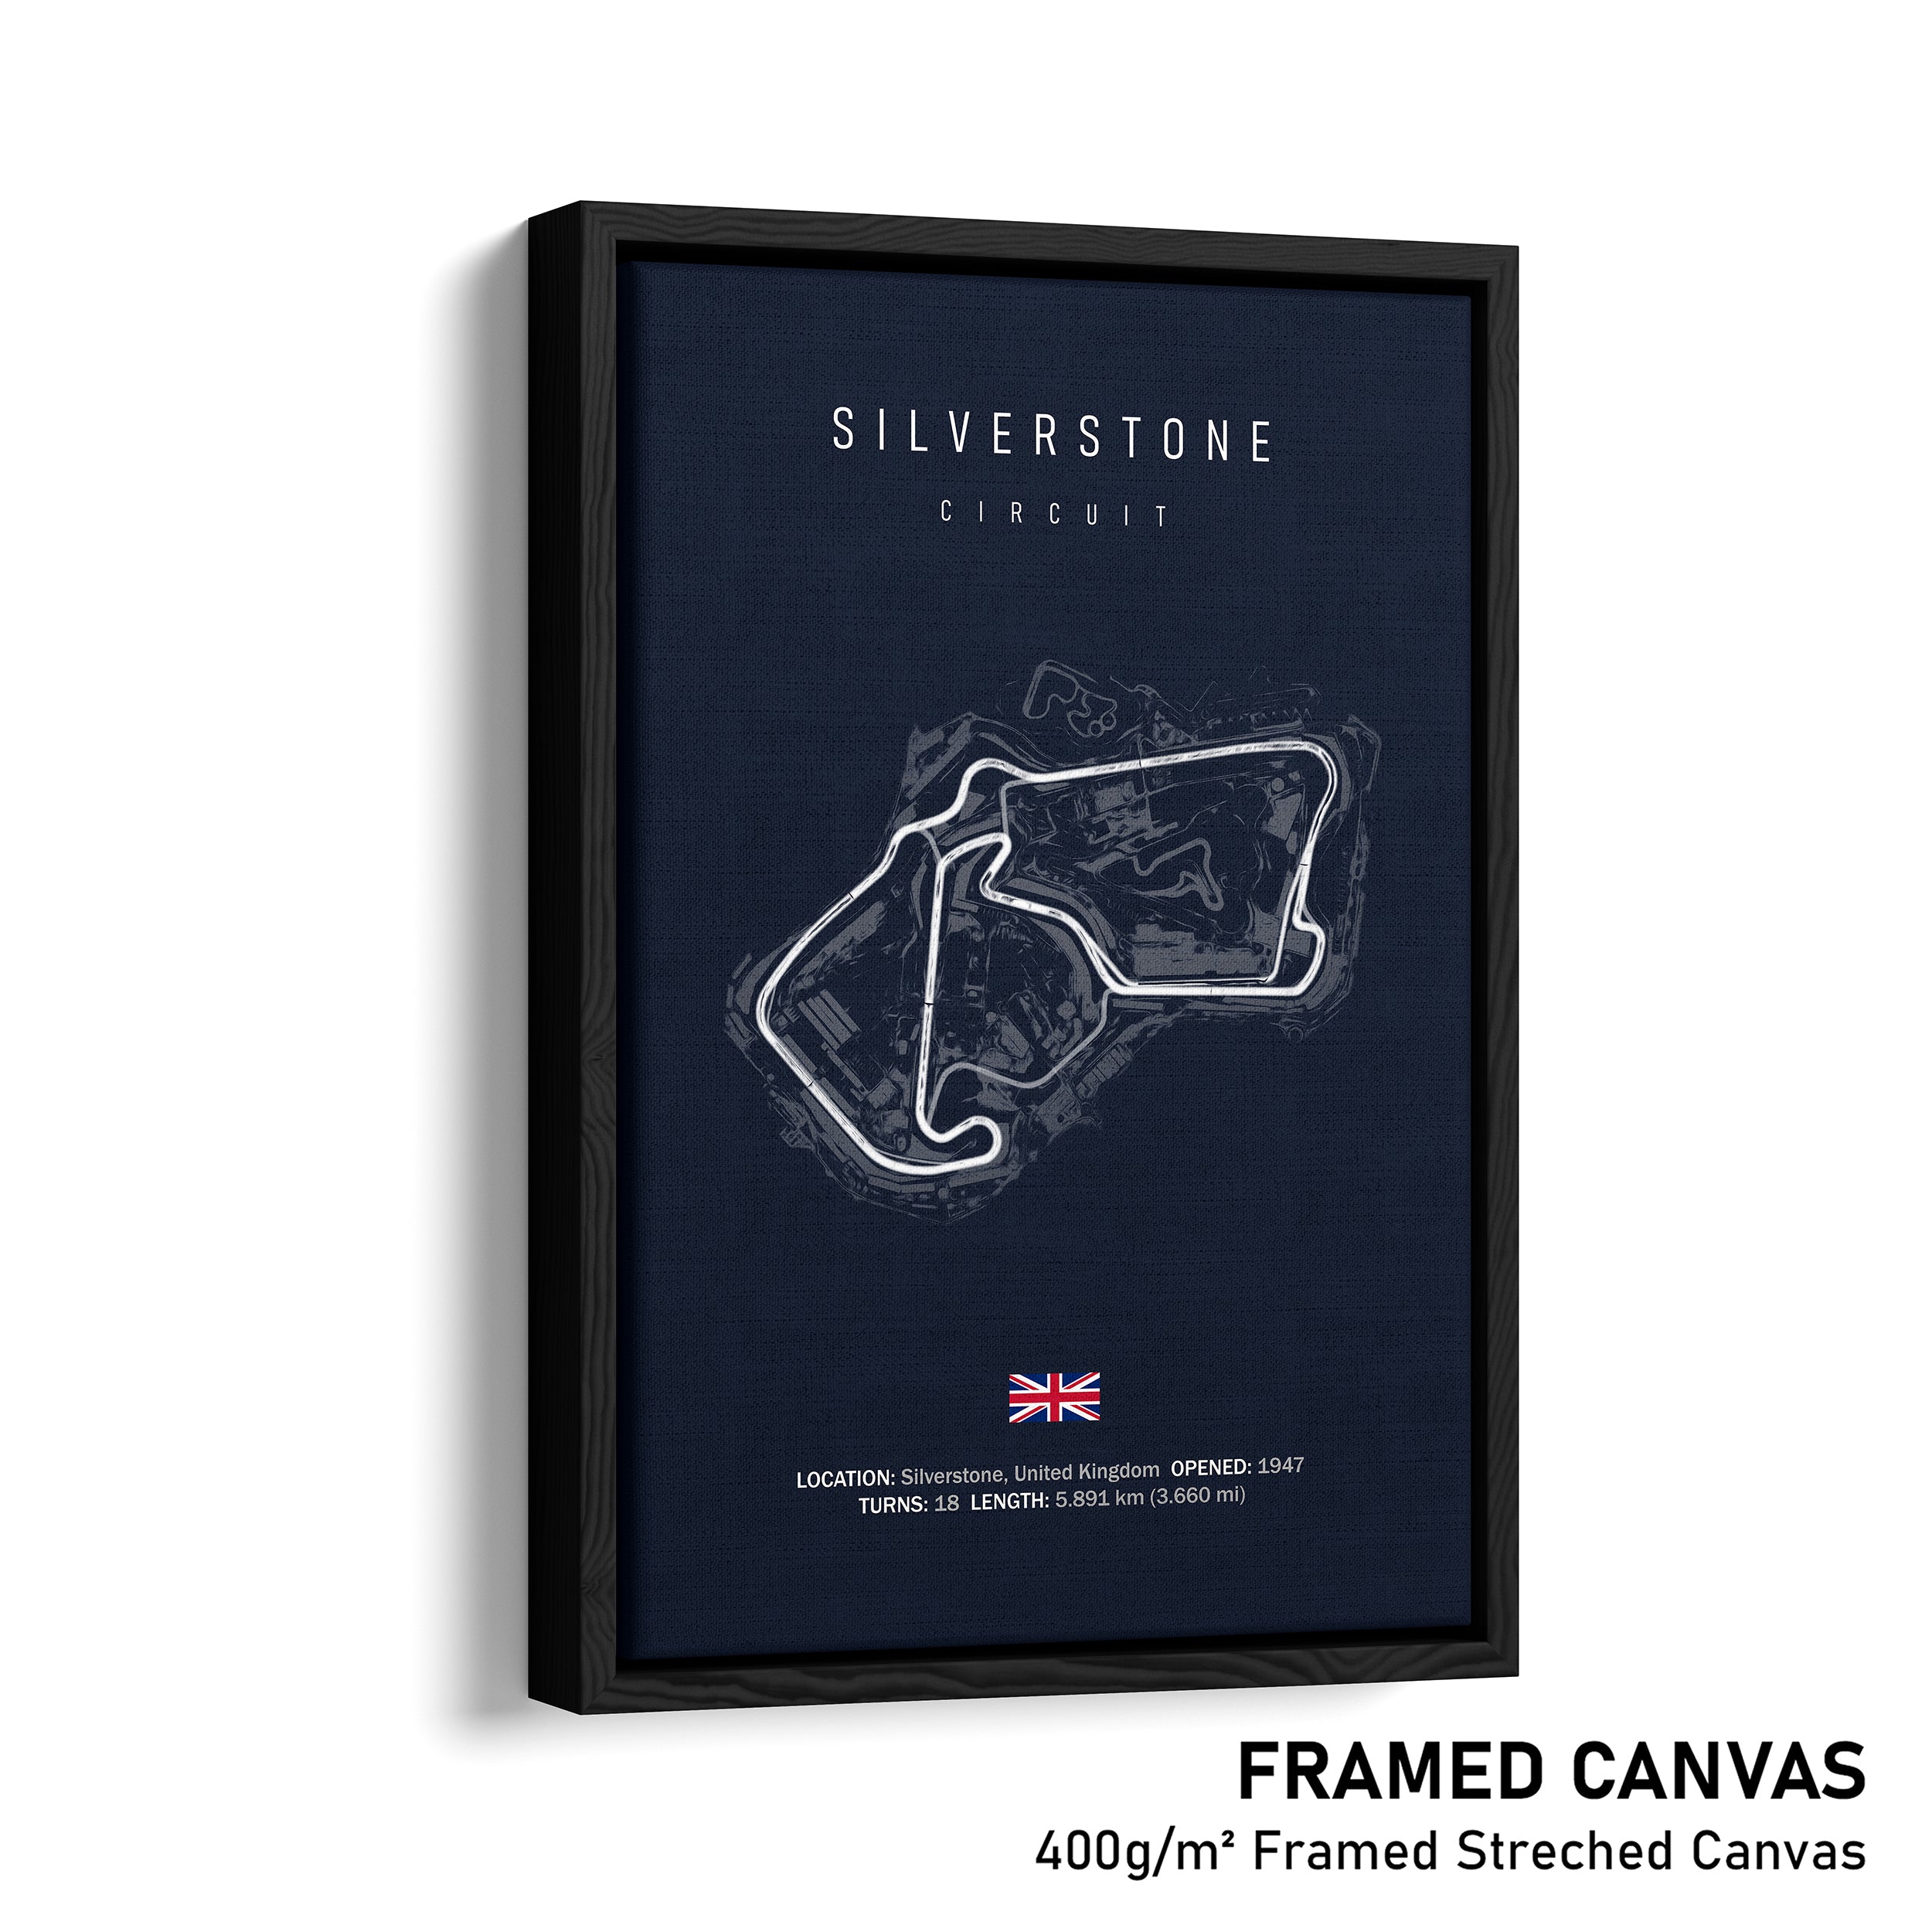 Silverstone Circuit - Racetrack Framed Canvas Print